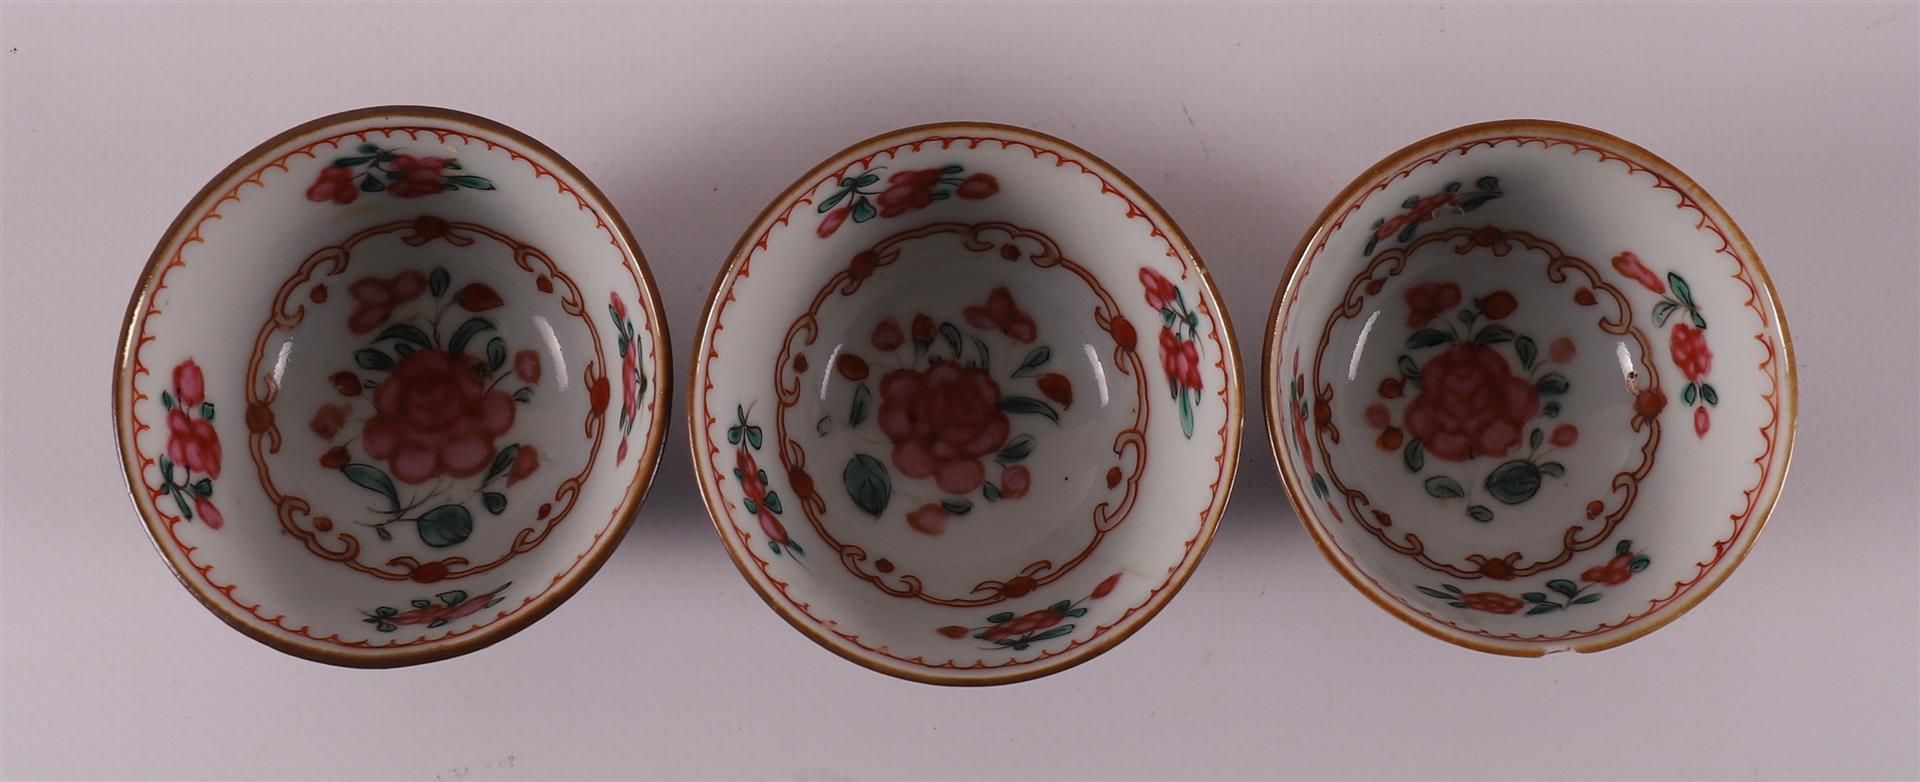 Three famille rose cups and saucers on capucine ground, China, Qianlong, 18th ce - Image 7 of 9